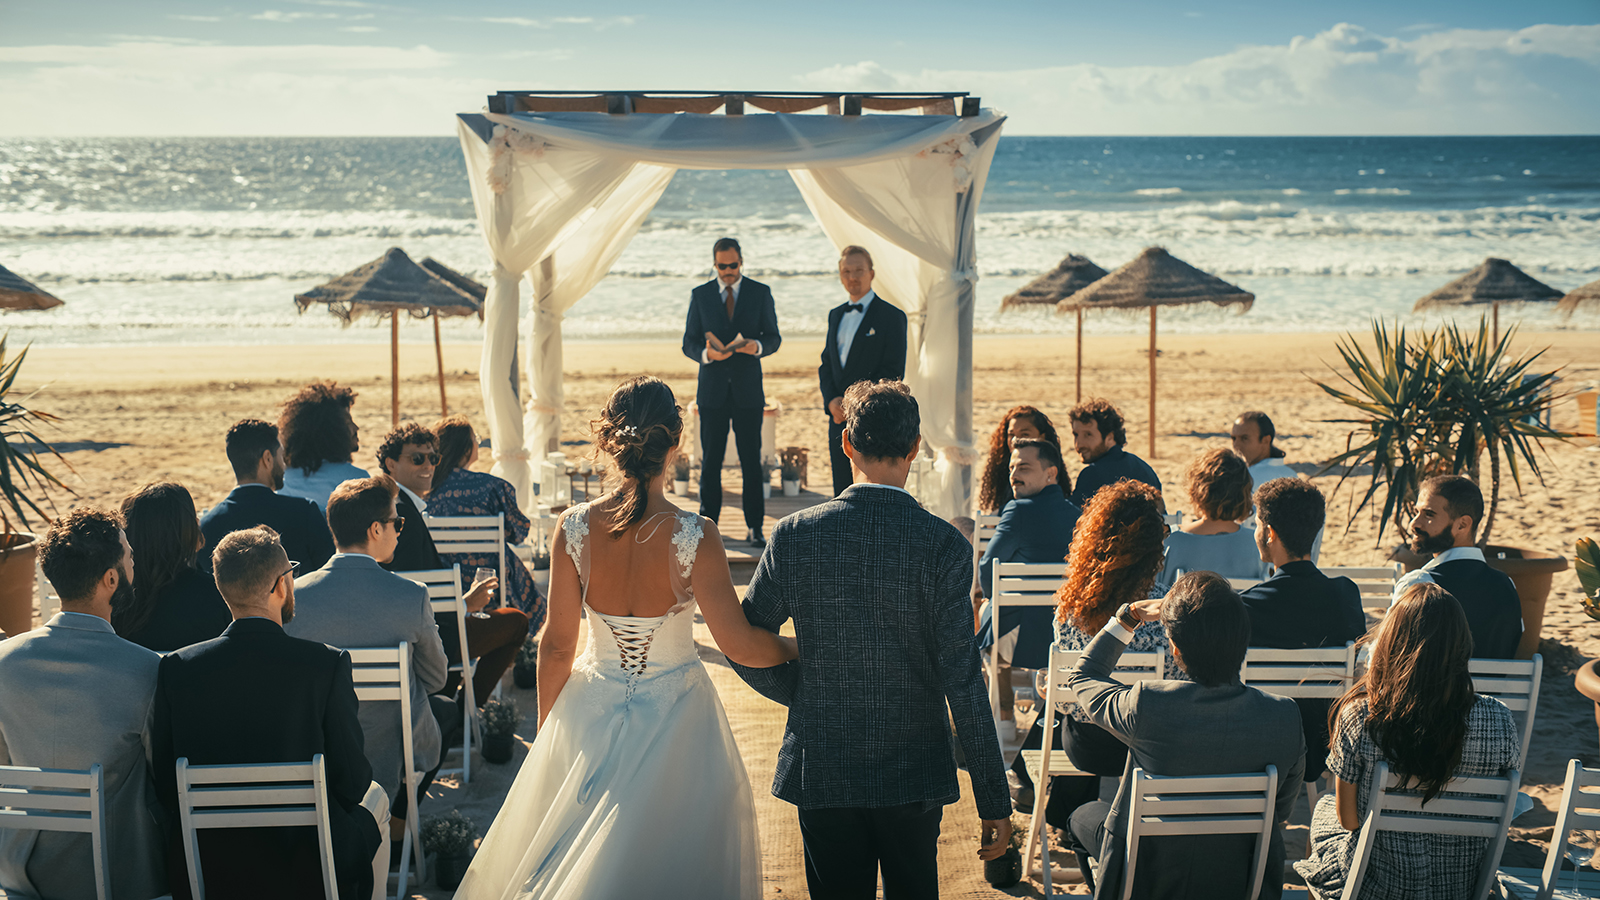 Beautiful Bride in White Wedding Dress Going Down the Aisle with Her Father, while Groom Waits at an Outdoors Ceremony Venue Near the Sea with Happy Multiethnic and Diverse Friends.